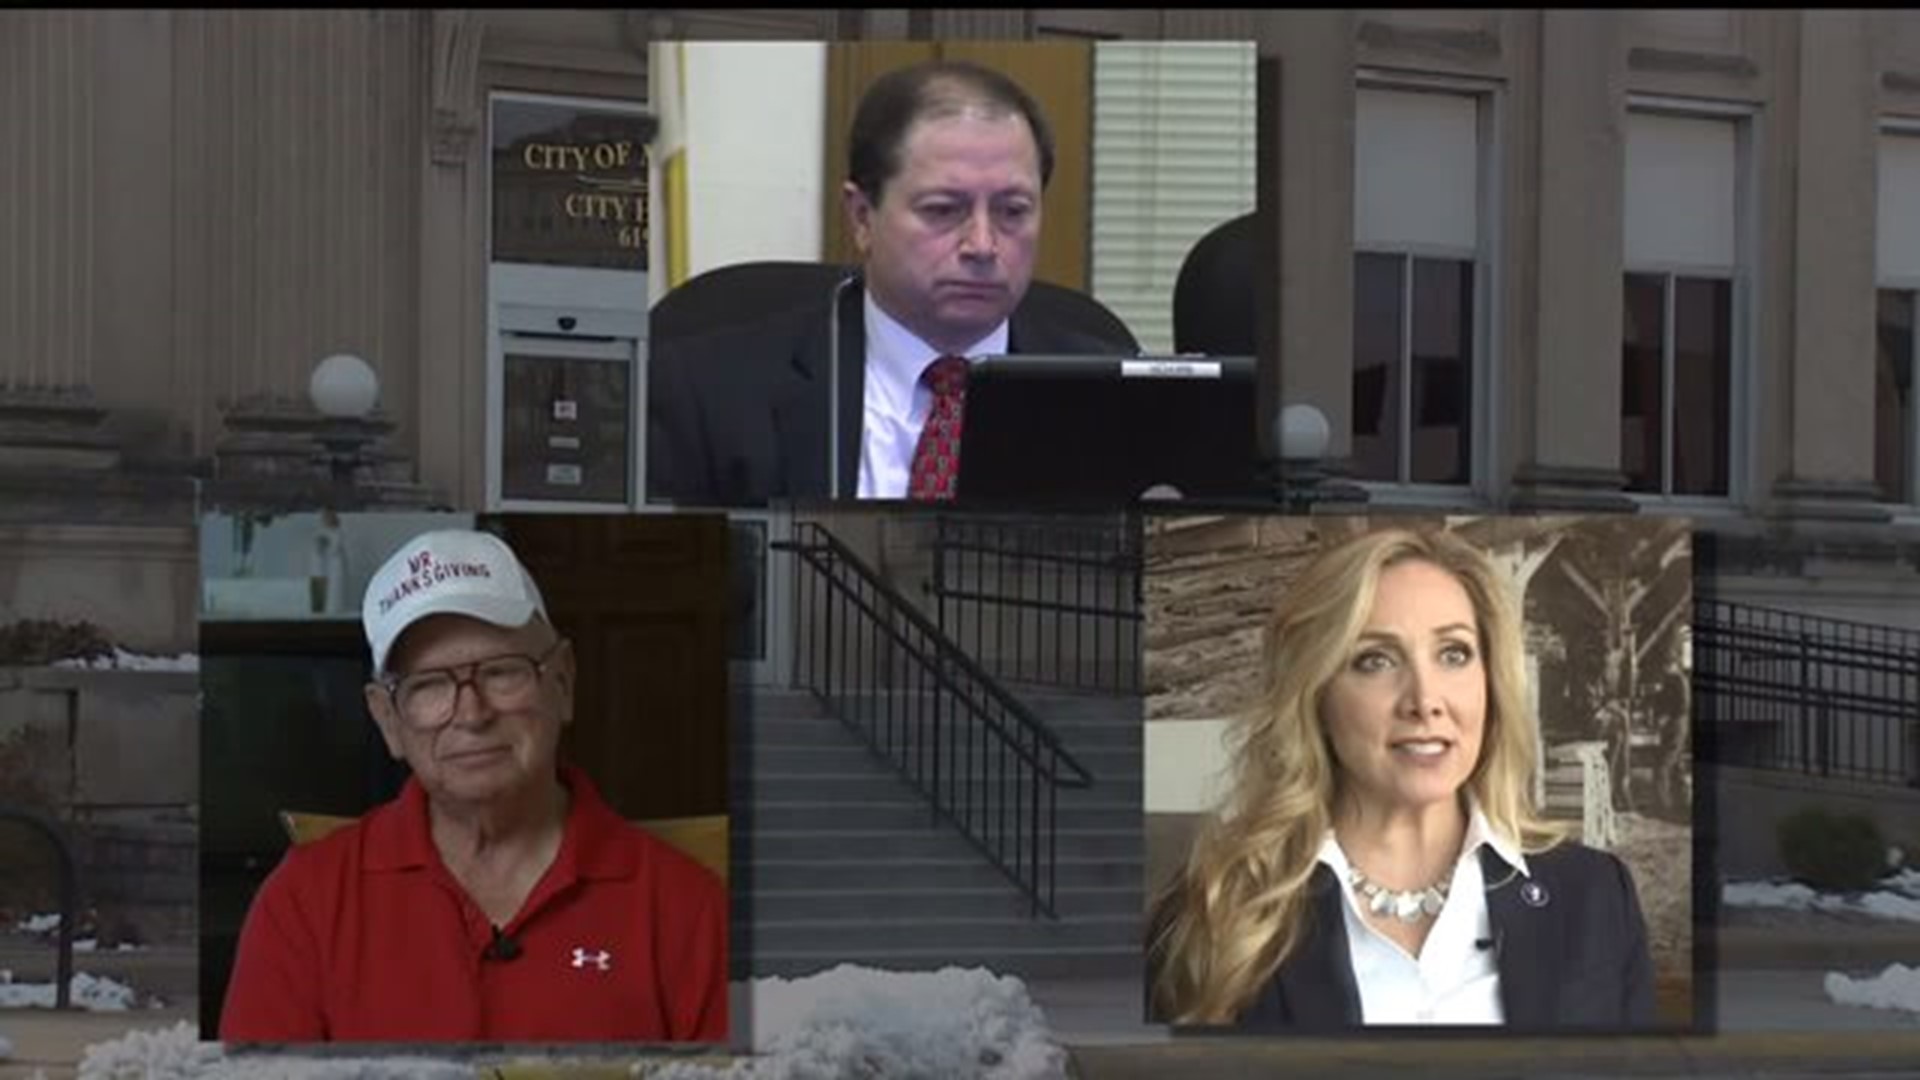 Moline Mayoral Candidates meet outside City Hall to talk qualifications